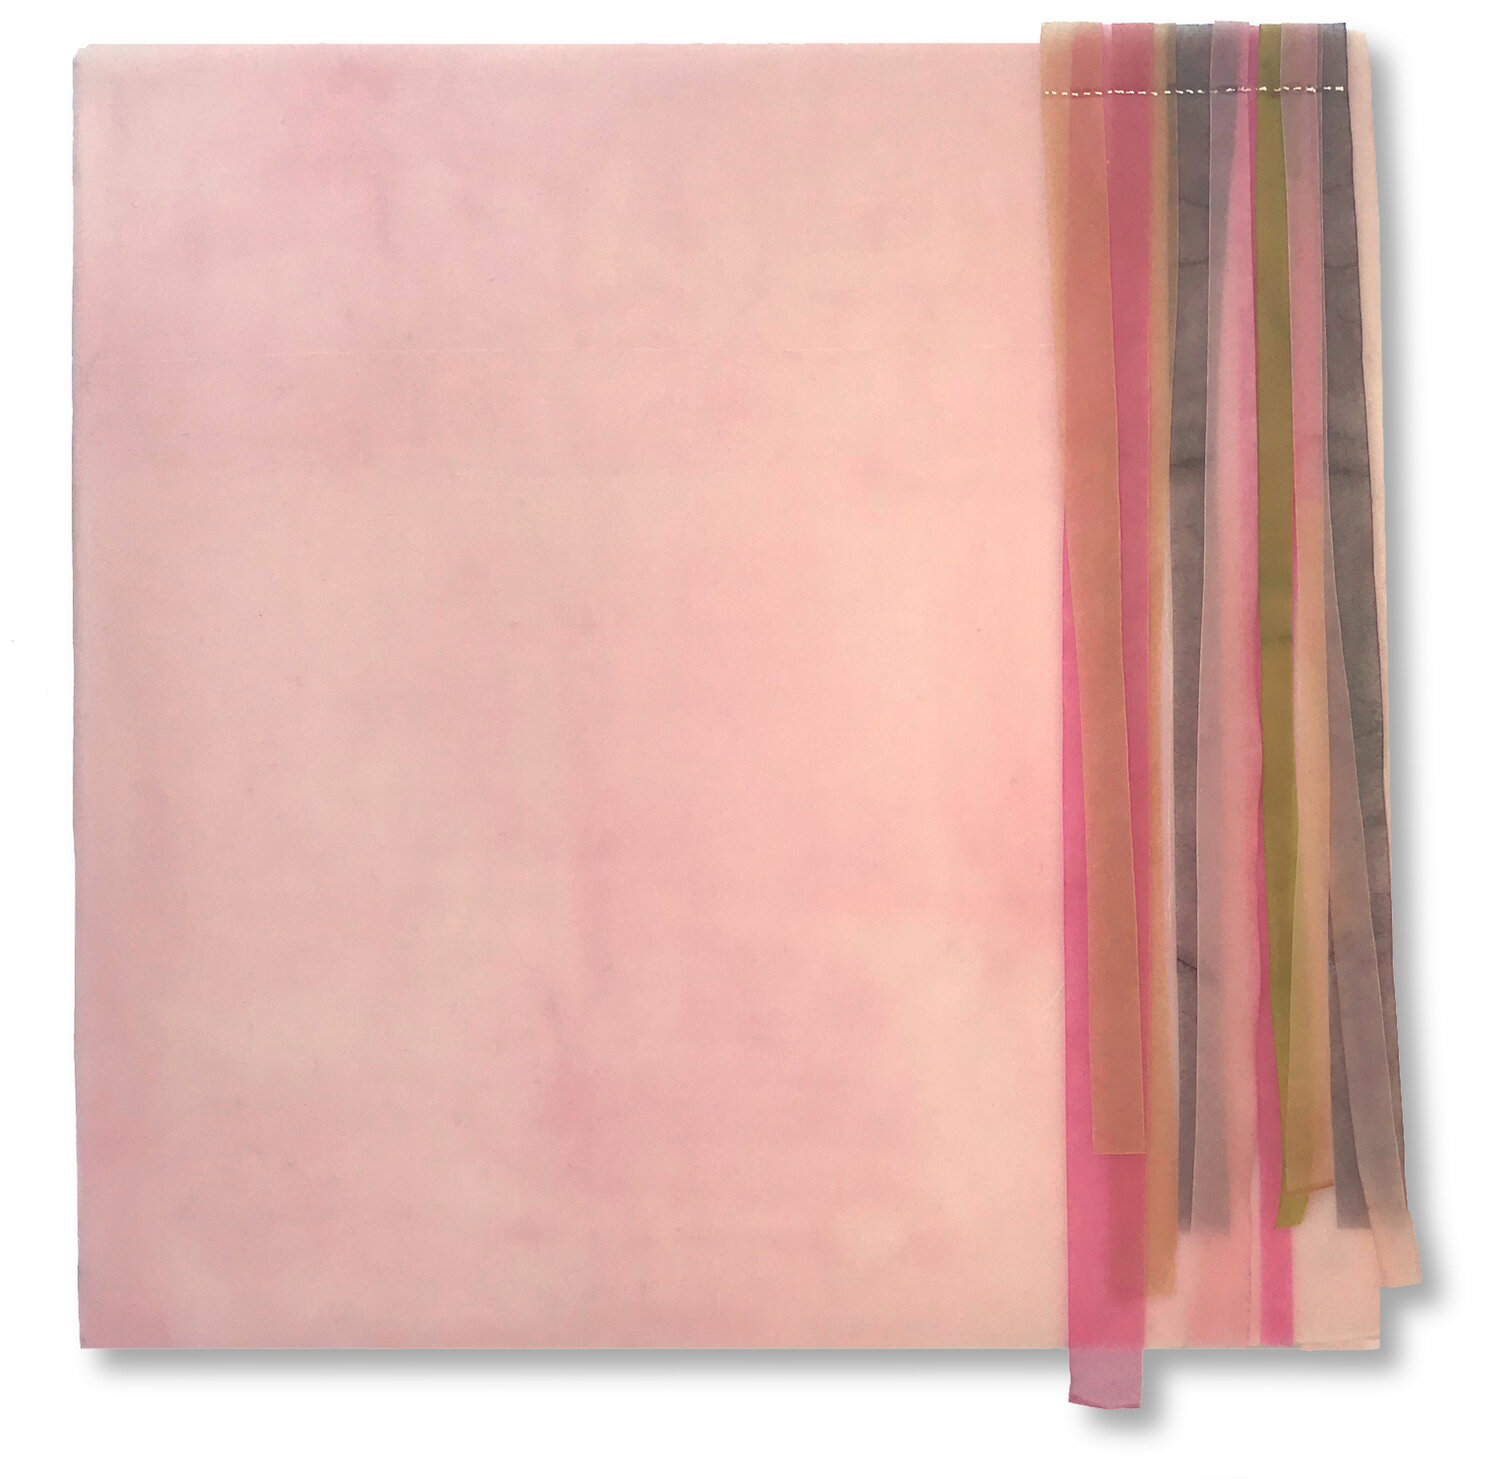  Mood Board 12, 2019 Encaustic, Mulberry paper, watercolor 8 x 8 inches  The Moodboards are an exploration of the subtle ways colors interact and influence each other. Strips of dyed mulberry paper are juxtaposed with an intense flat color, reminisce